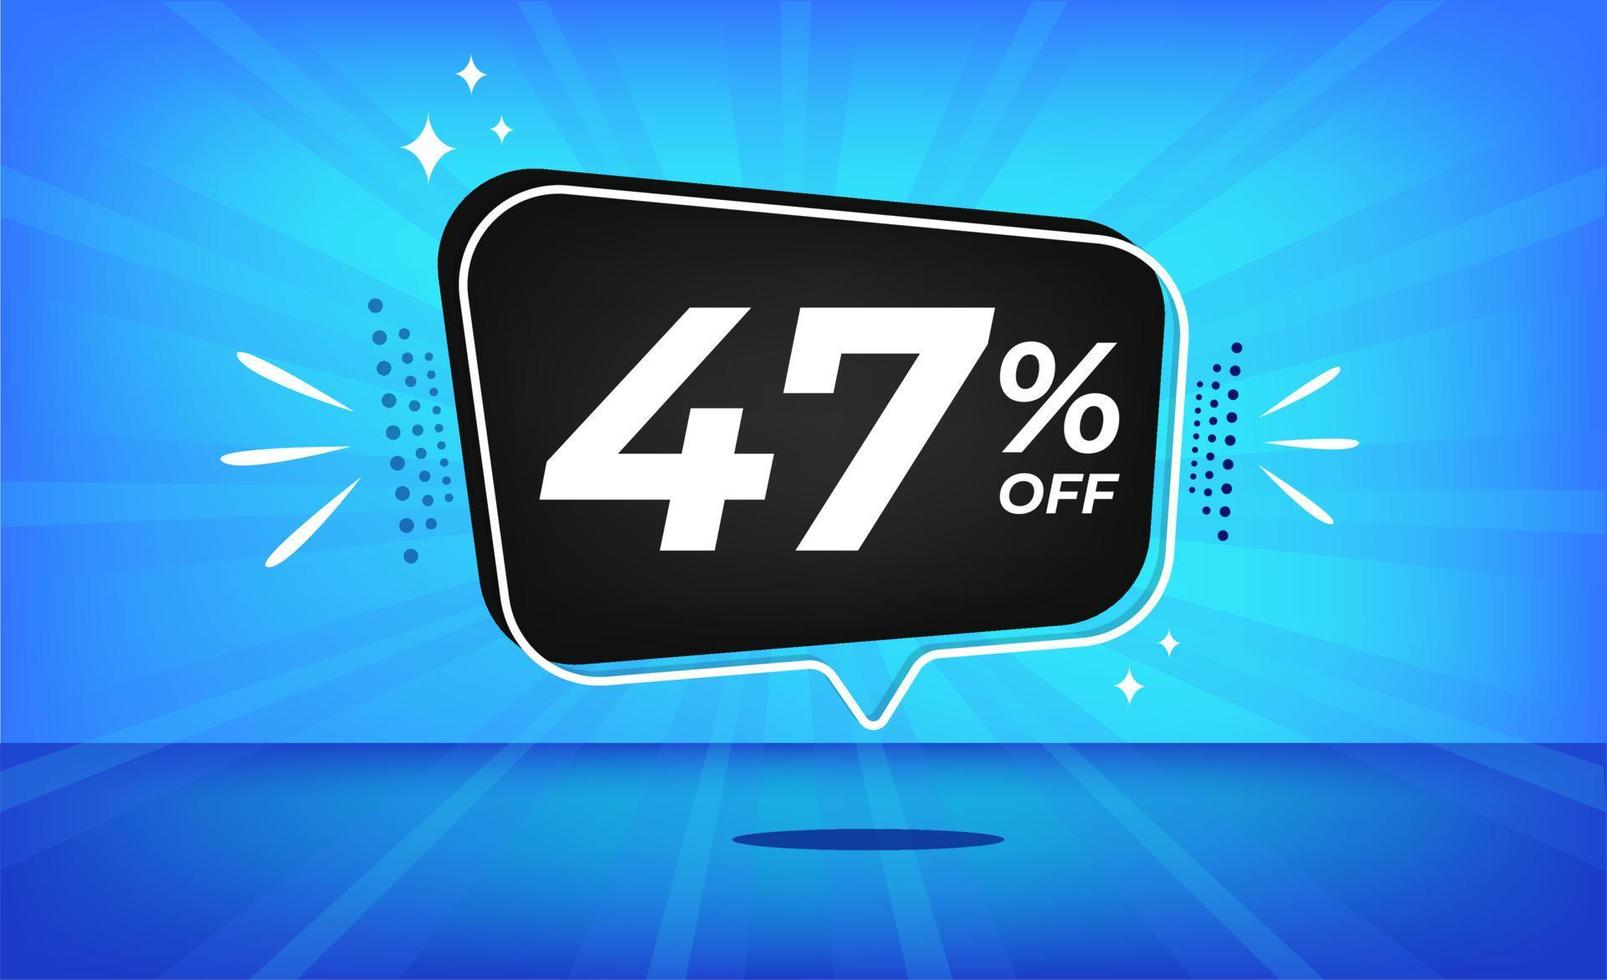 47 percent off. Blue banner with forty-seven percent discount on a black balloon for mega big sales. vector